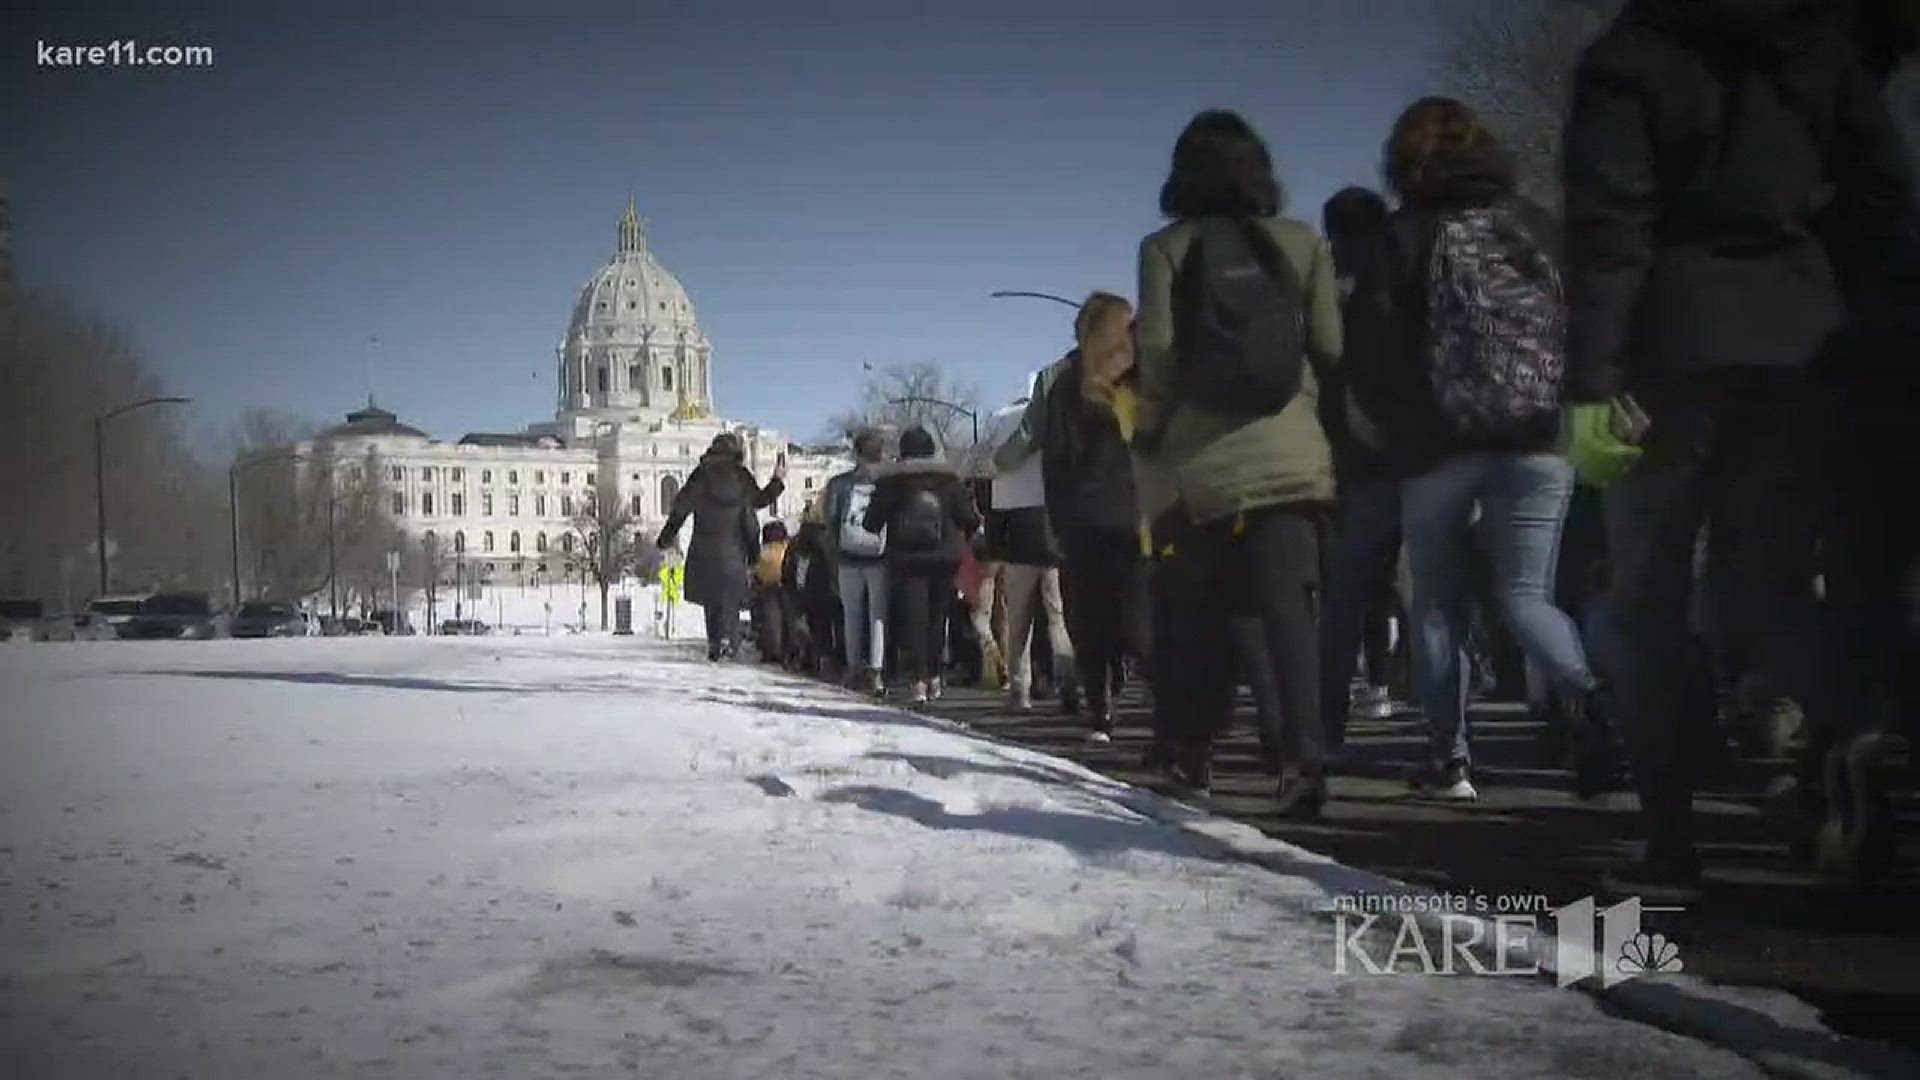 At least 70 schools will walk out of class at 10:00 a.m. Wednesday. http://kare11.tv/2IoLSMb